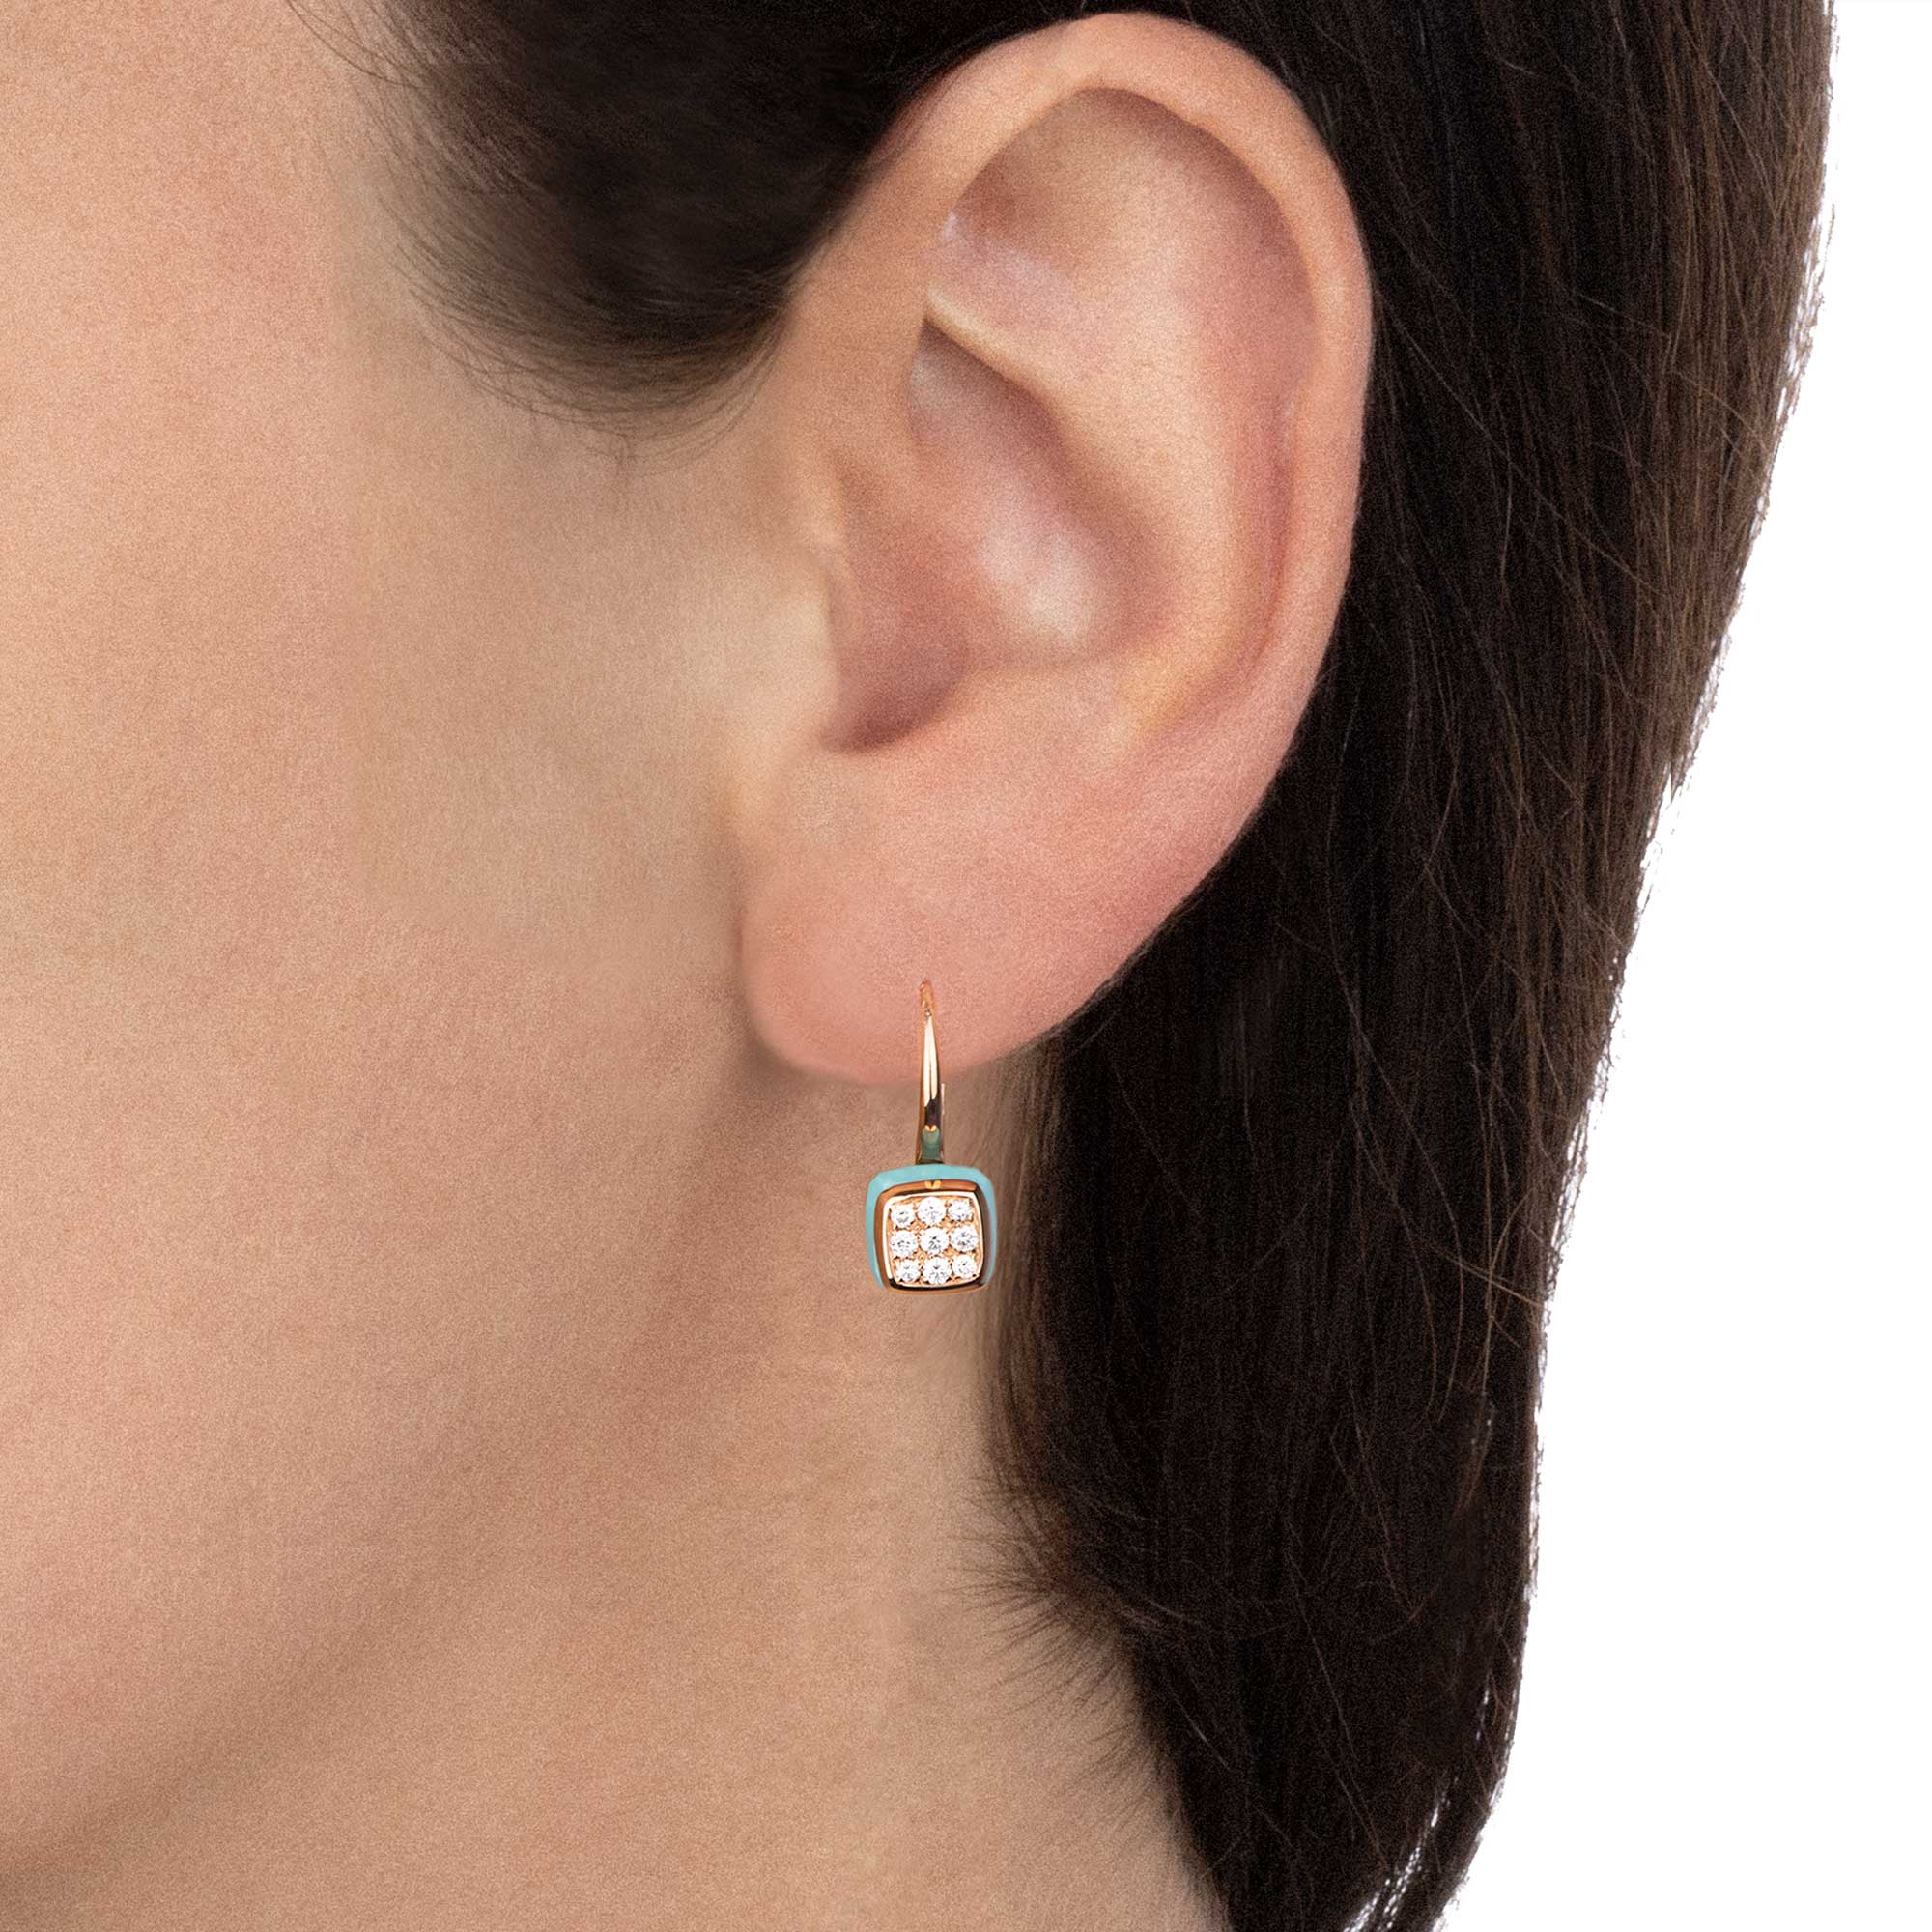 Les Petits Bonbons Earrings Square With Turquoise And Diamonds